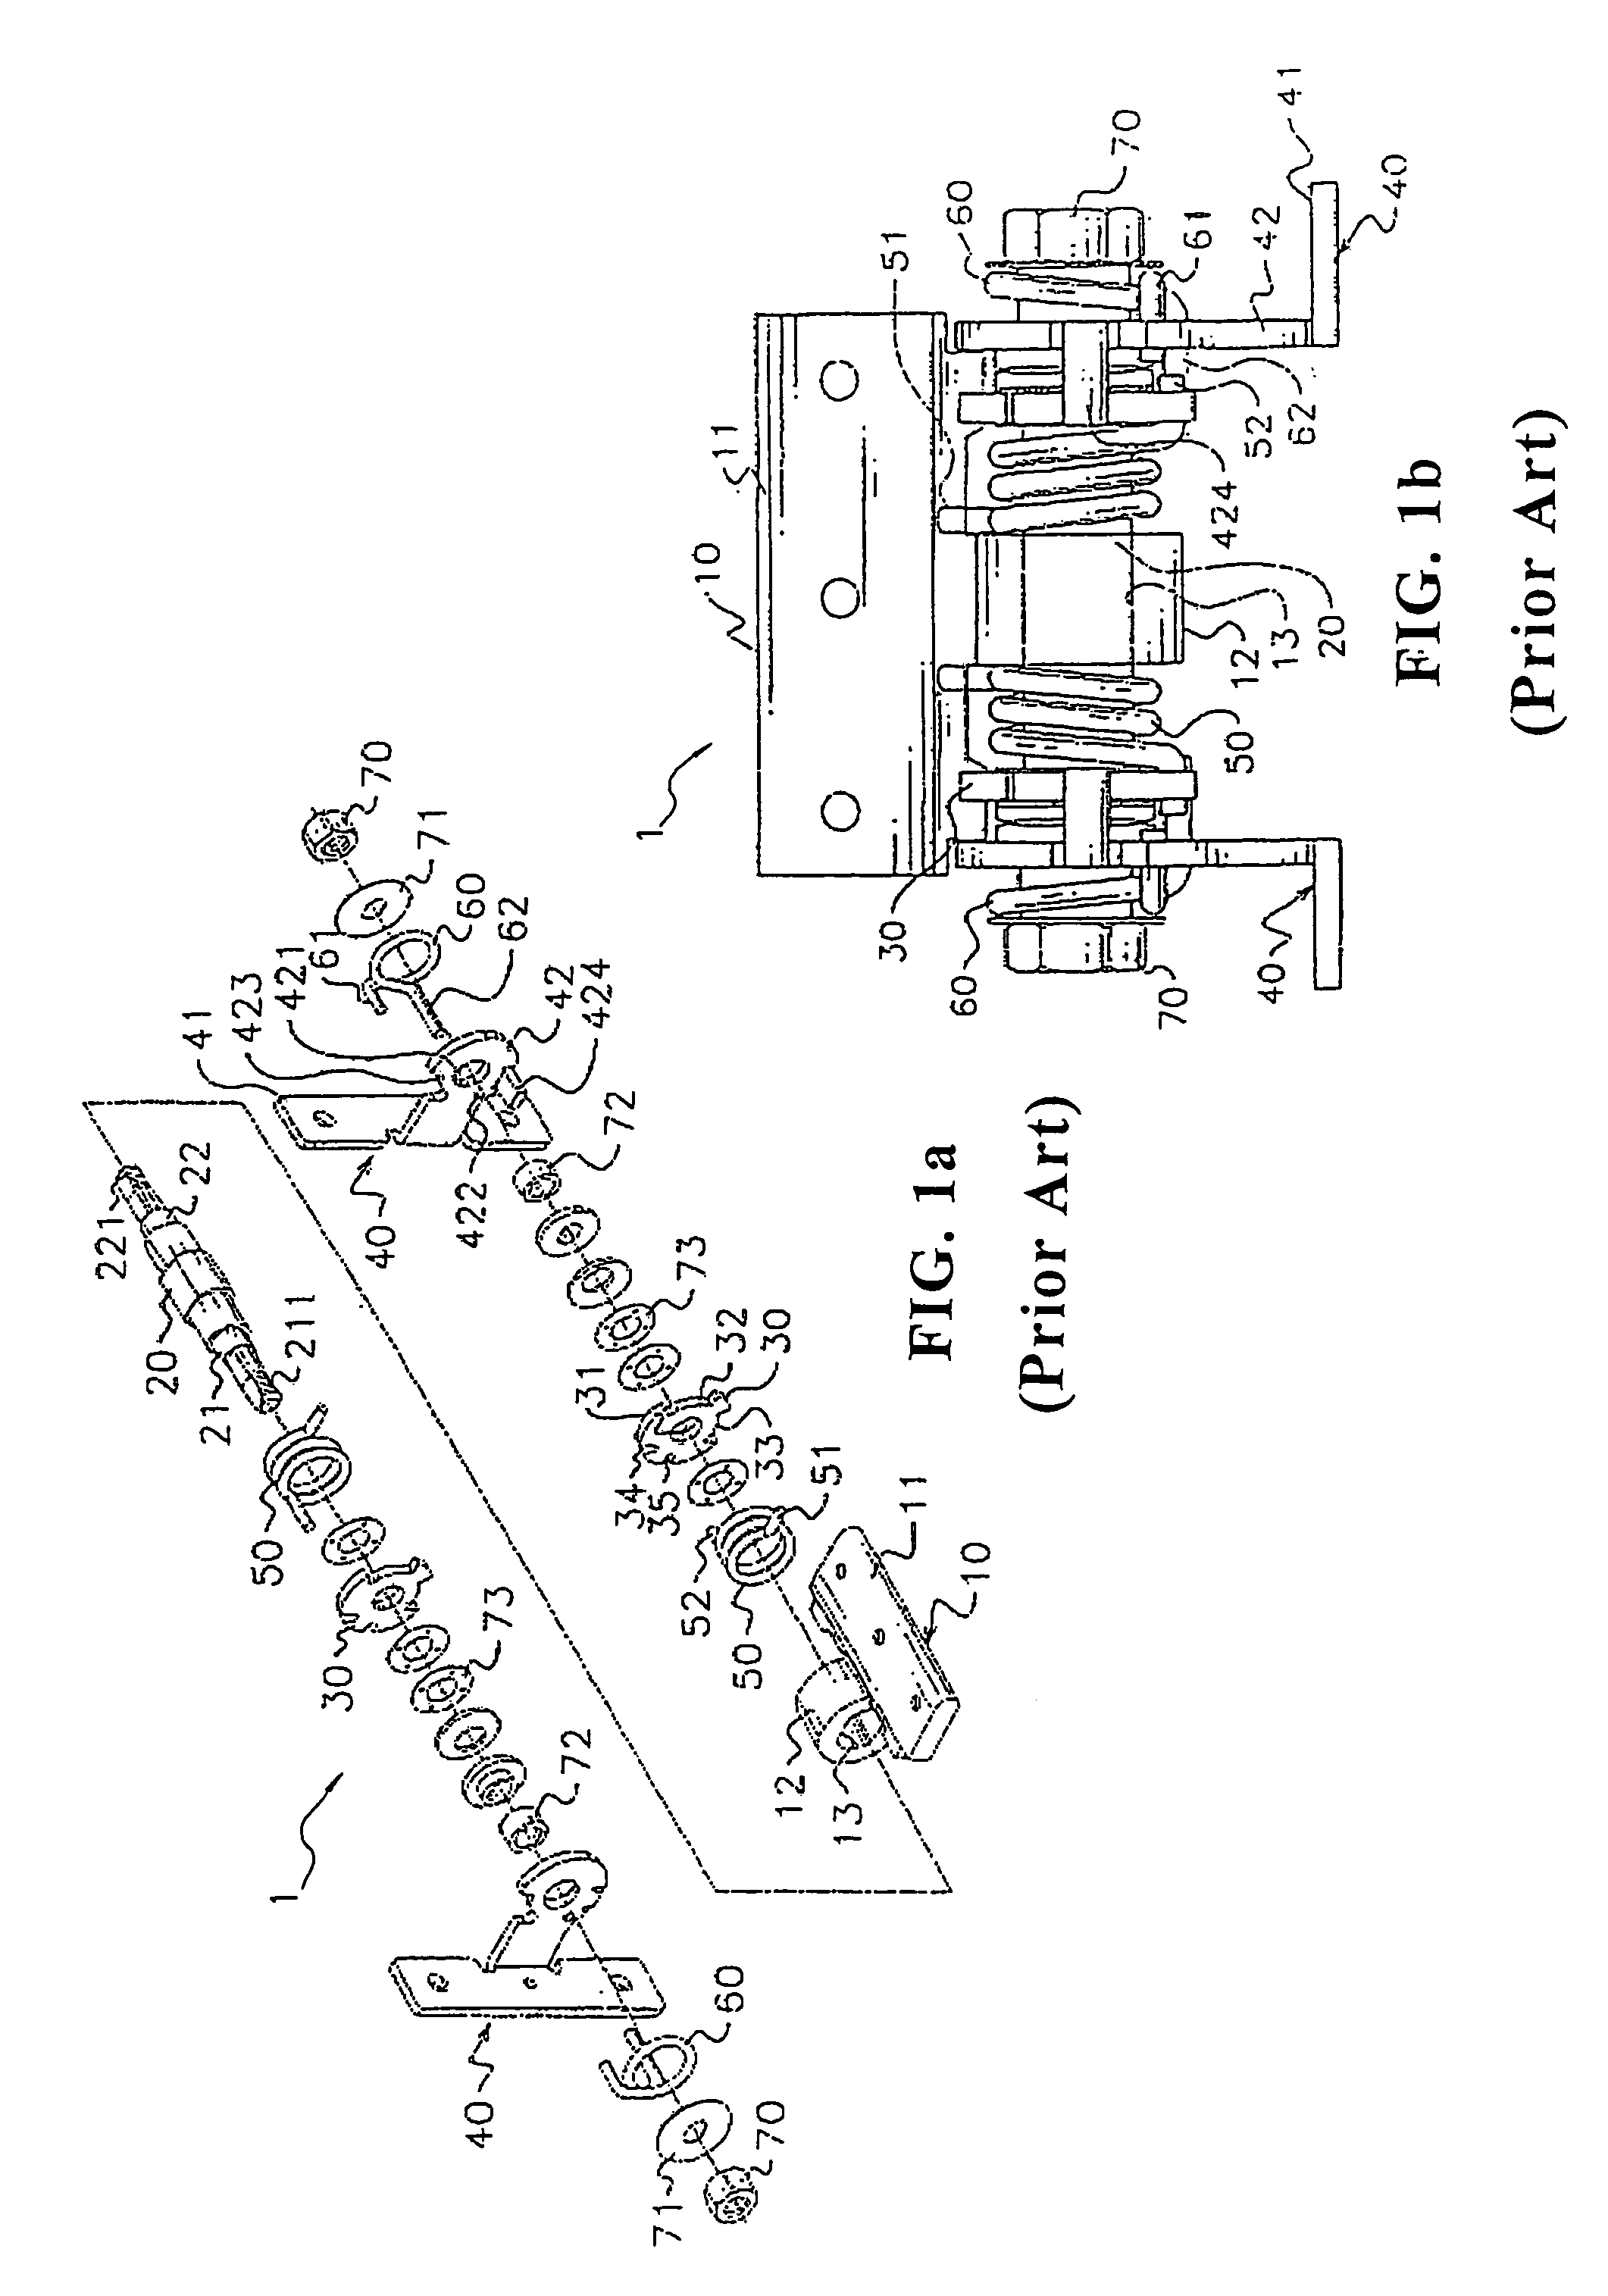 Hinge device for a flat panel display